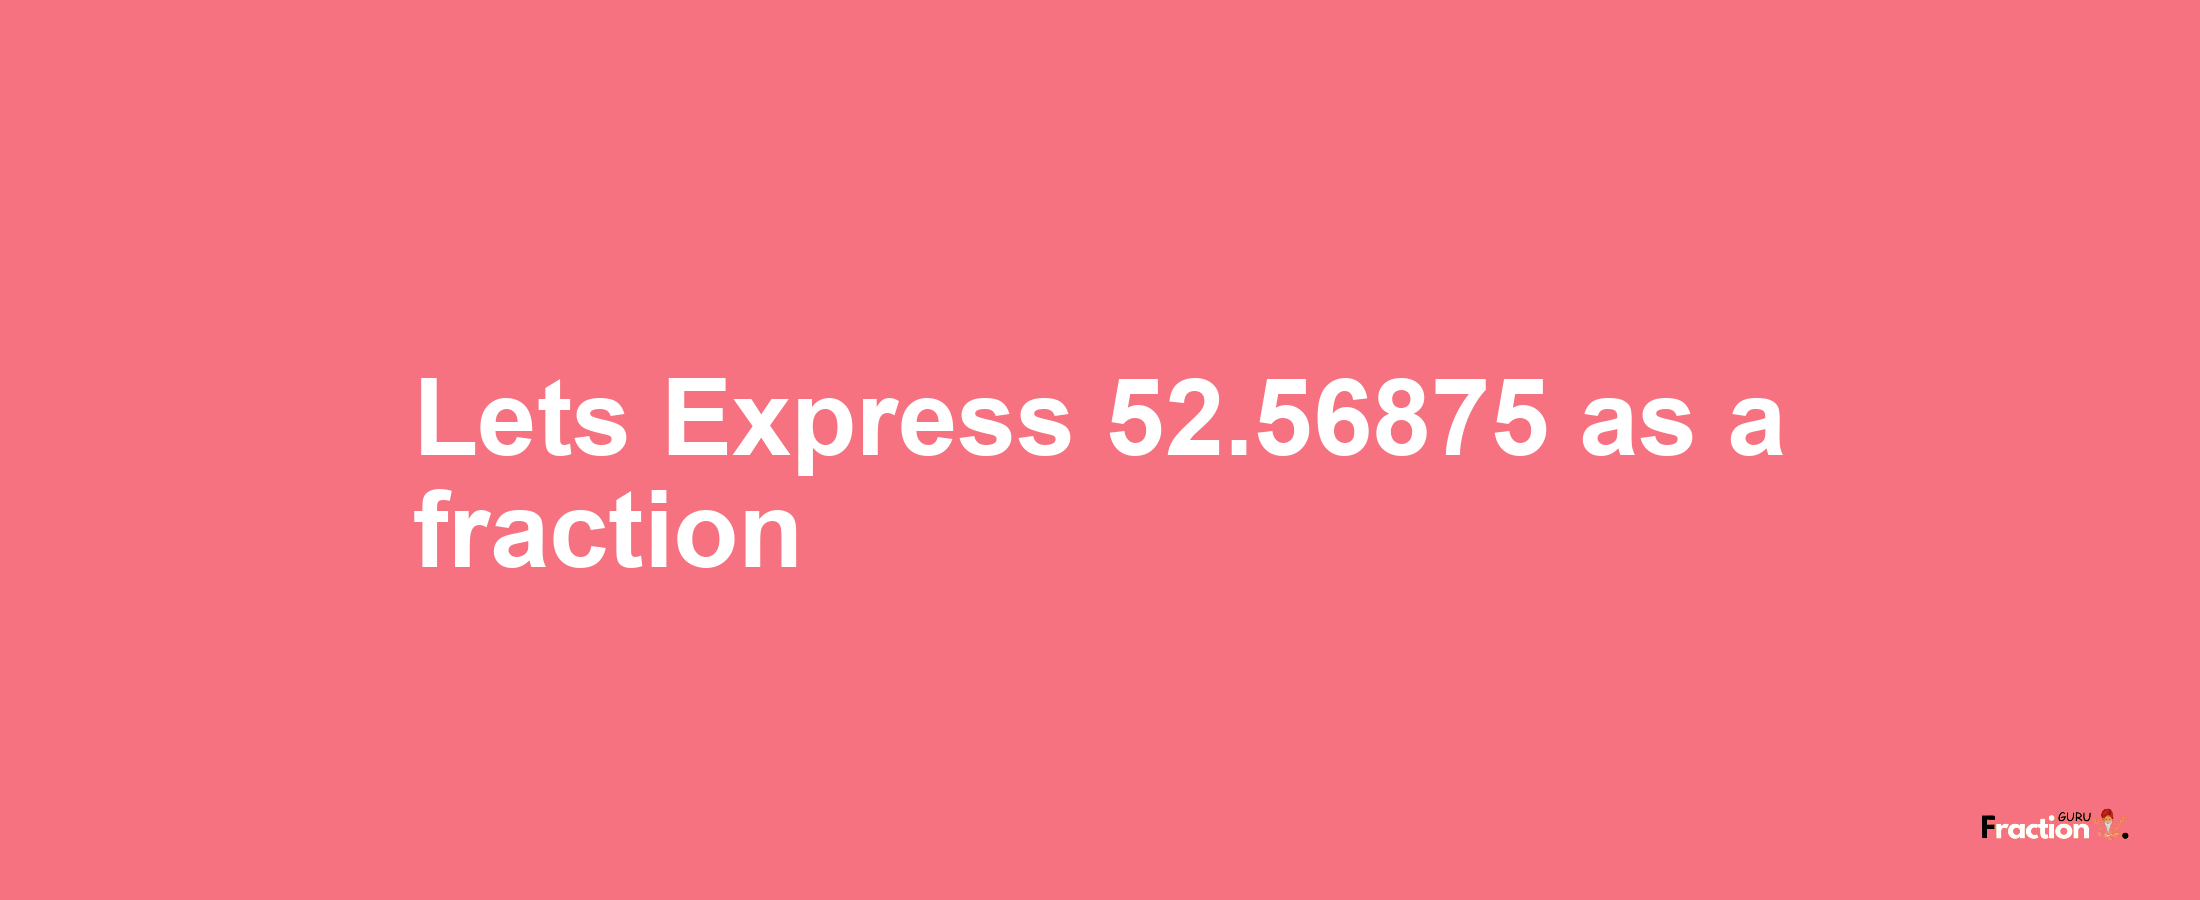 Lets Express 52.56875 as afraction